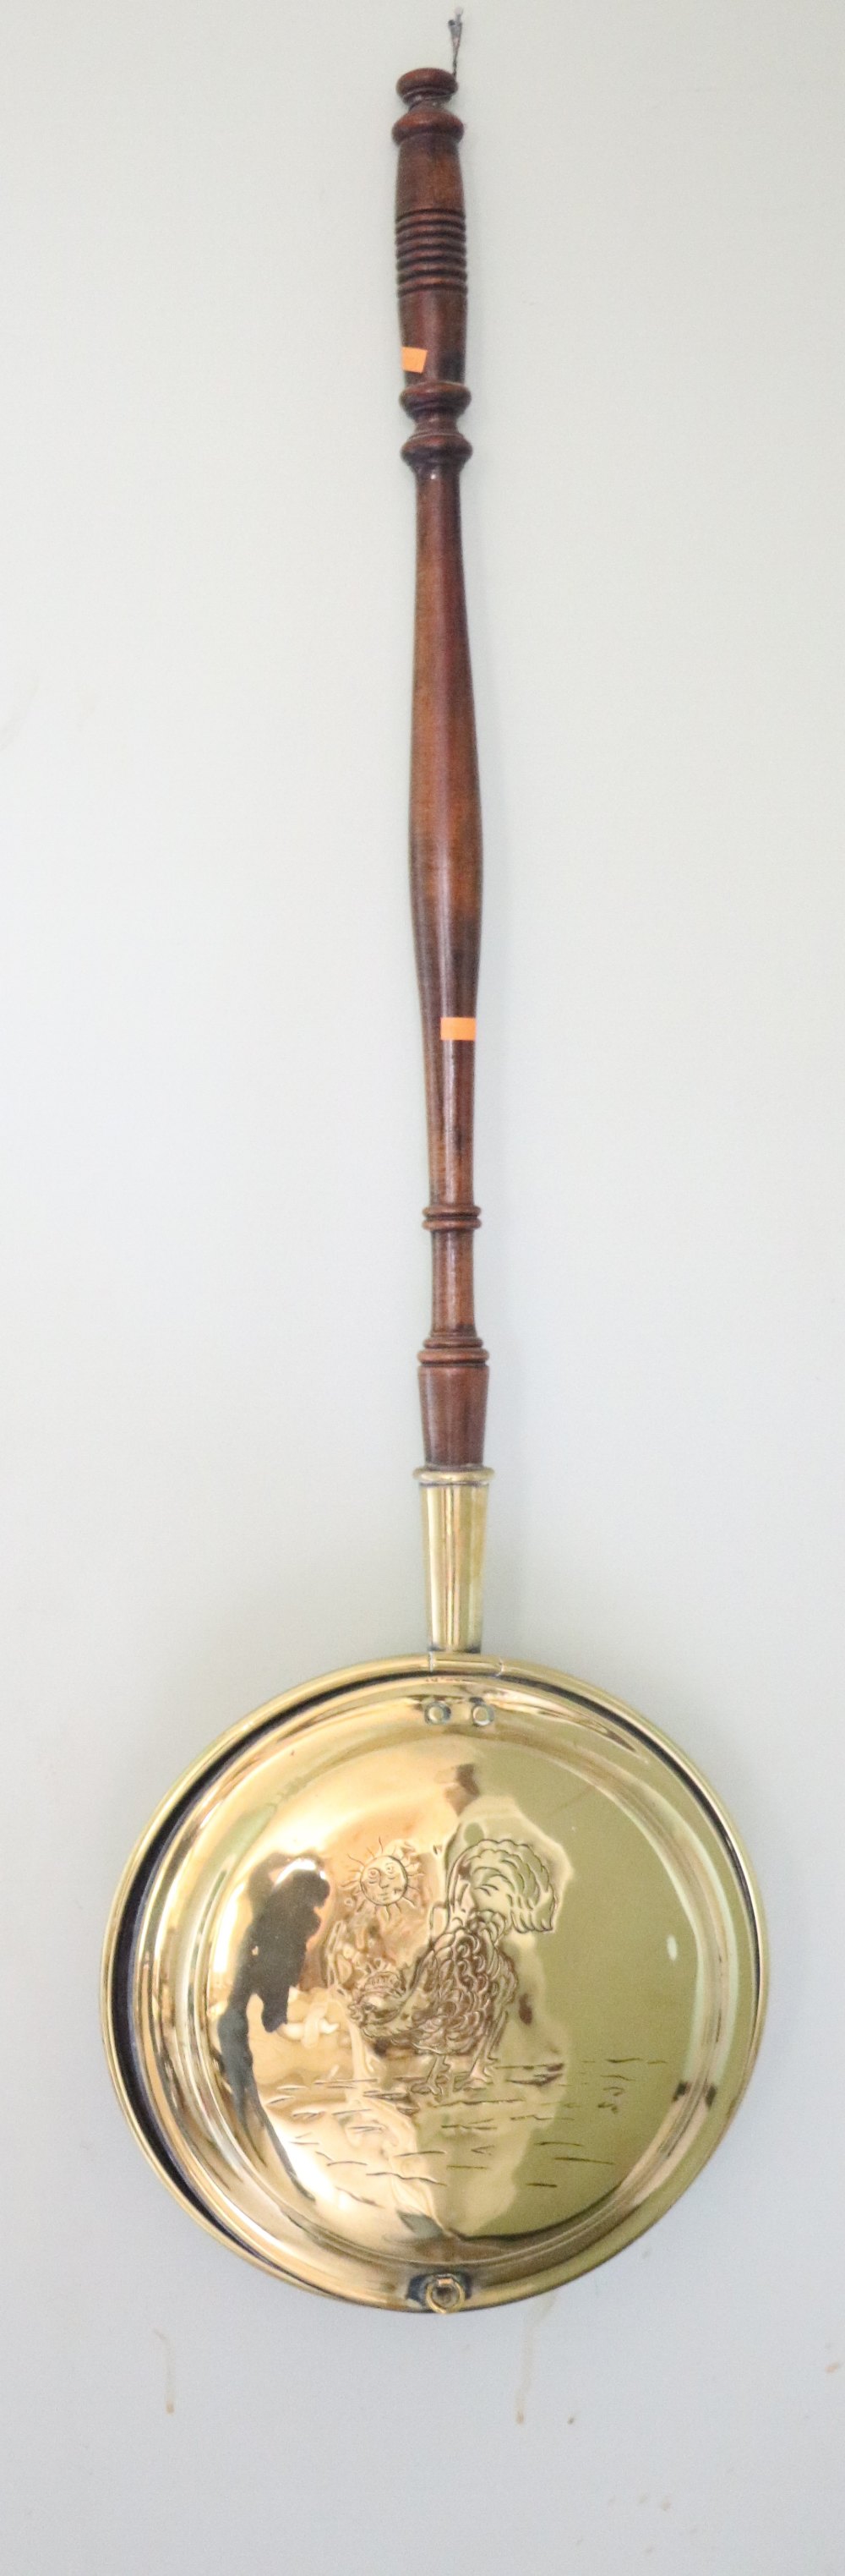 An antique engraved brass Bed Warmer, with turned wooden handle.